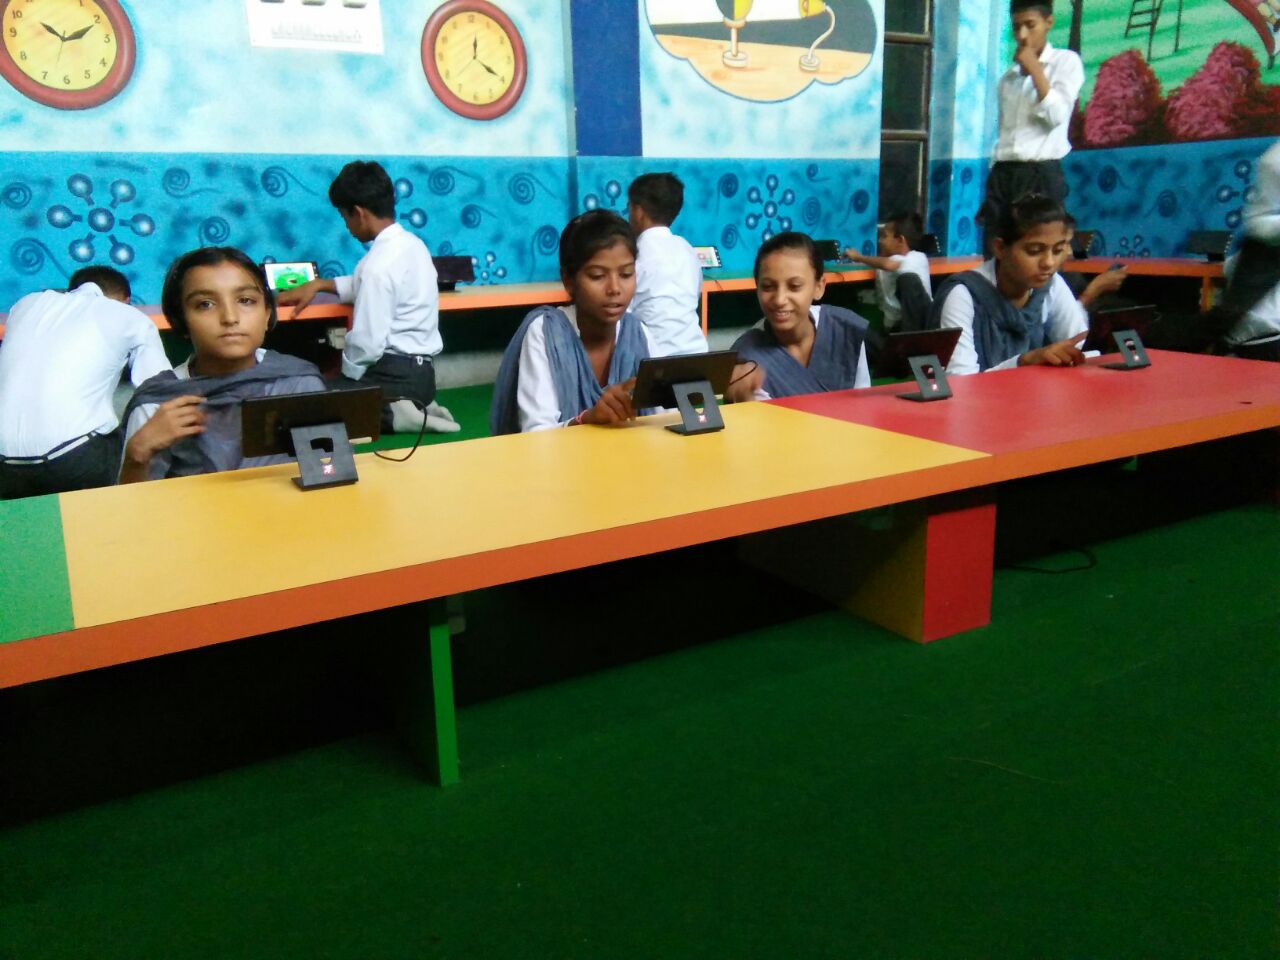 An Initiative to bridge the gap between differently-abled and abled children through Education in Sirsa, Haryana